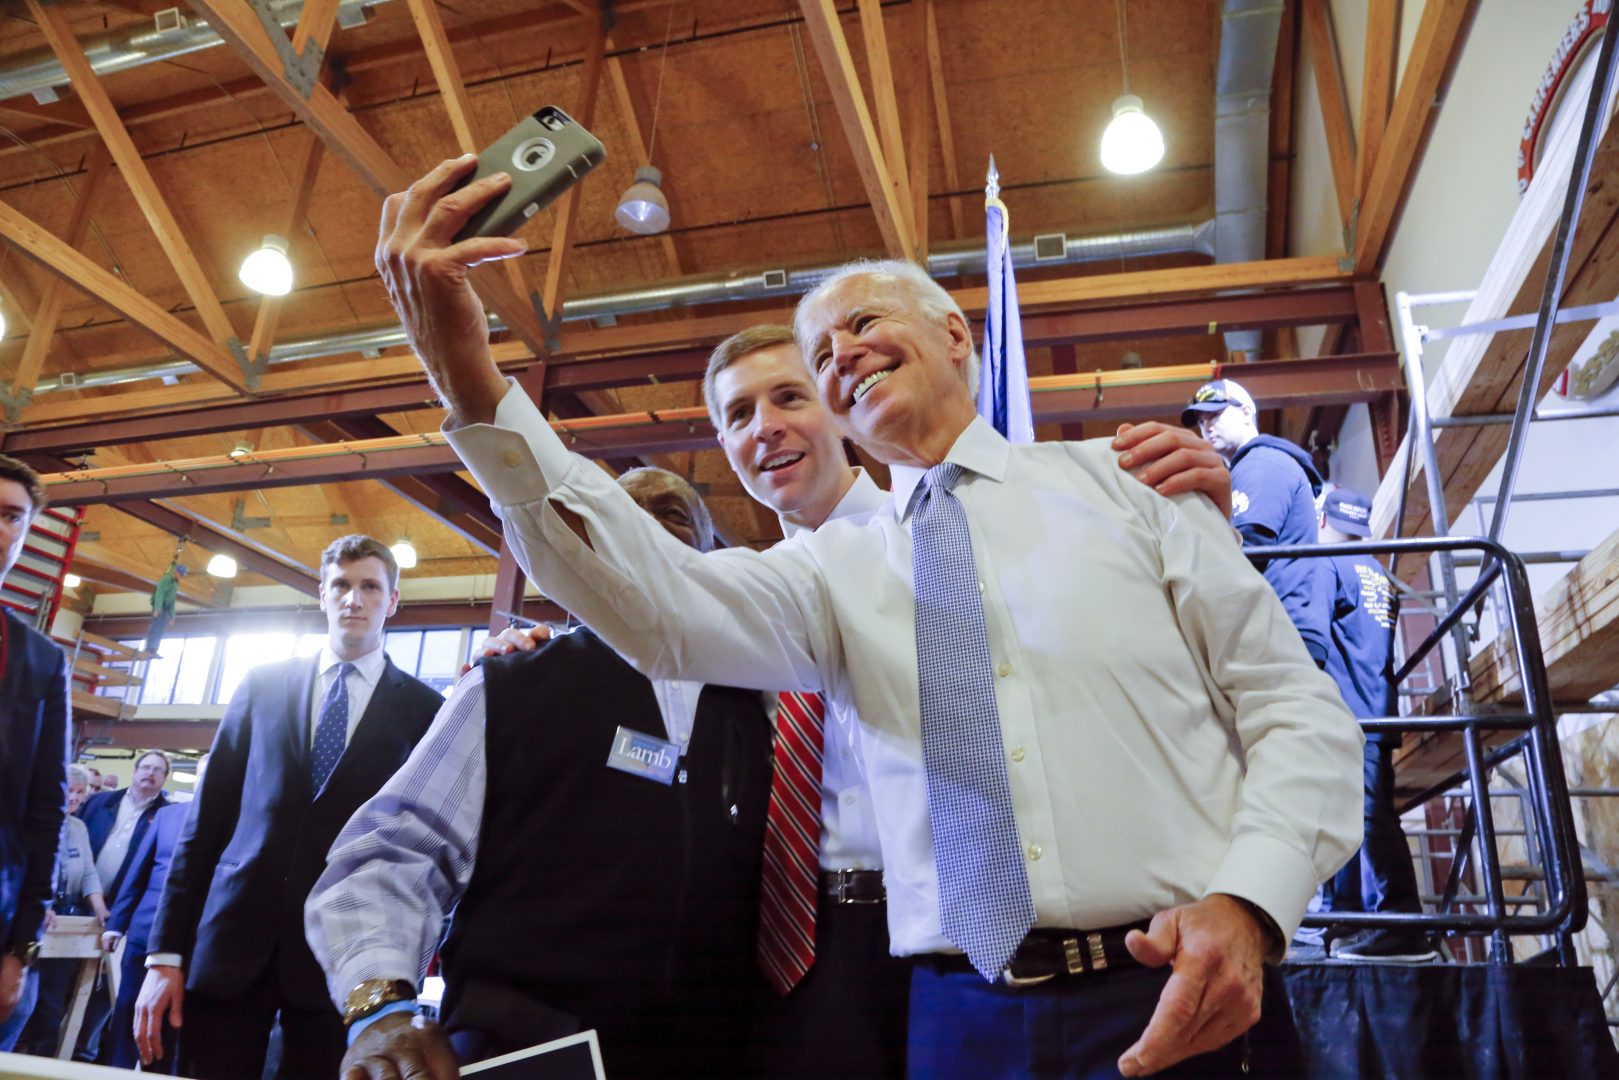 FILE PHOTO: Conor Lamb, center, then a Democratic candidate for the March 13 special election in Pennsylvania's 18th Congressional District, and former Vice President Joe Biden, right, pose for a selfie with a supporter during a rally at the Carpenter's Training Center in Collier, Pa., Tuesday, March 6, 2018.